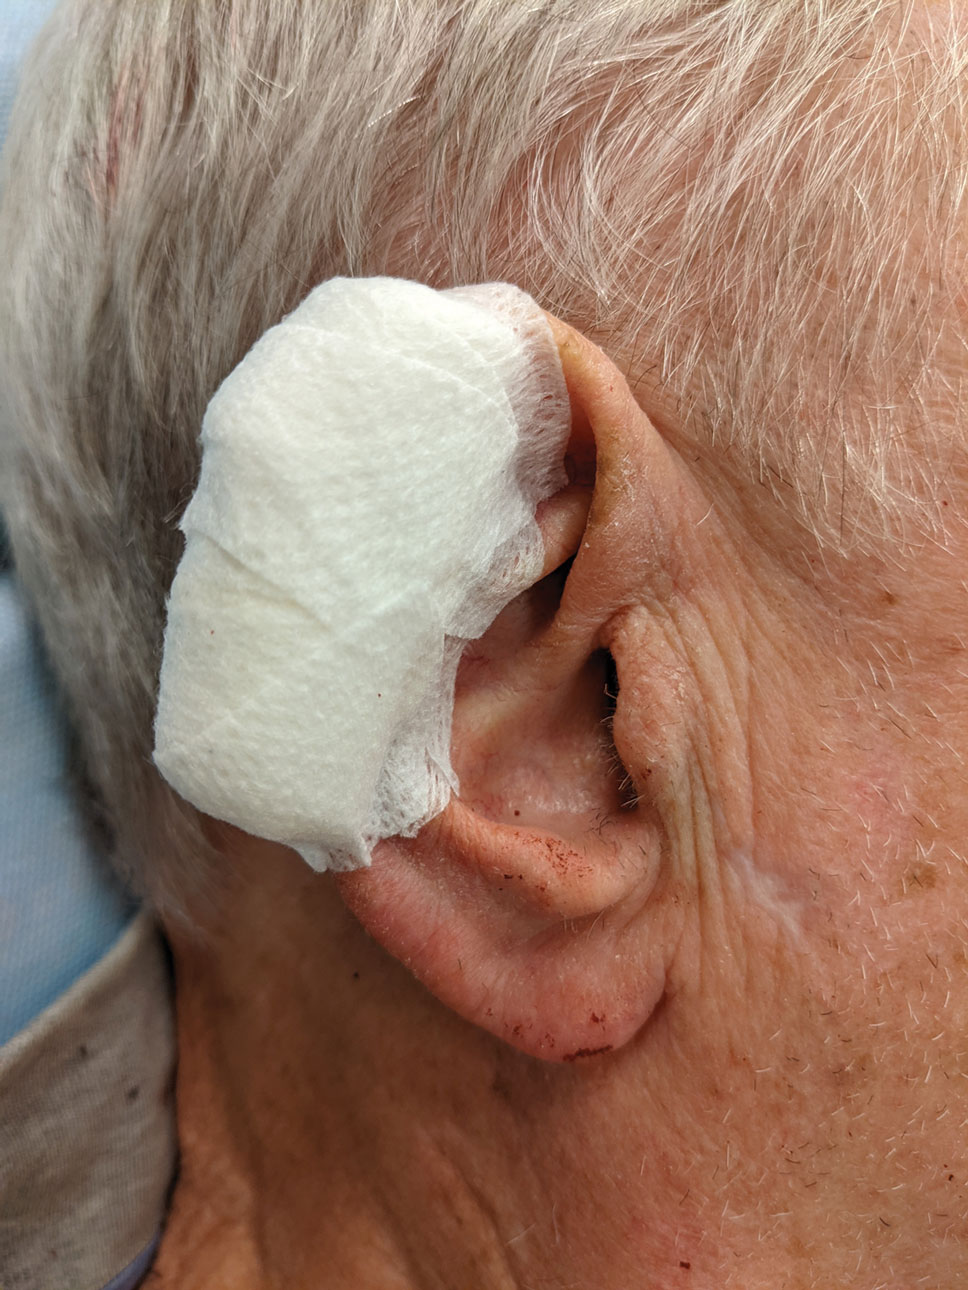 Pressure bandage on the ear, a traditionally hard-tobandage site. The elasticity of the tape conforms to the helical rim.